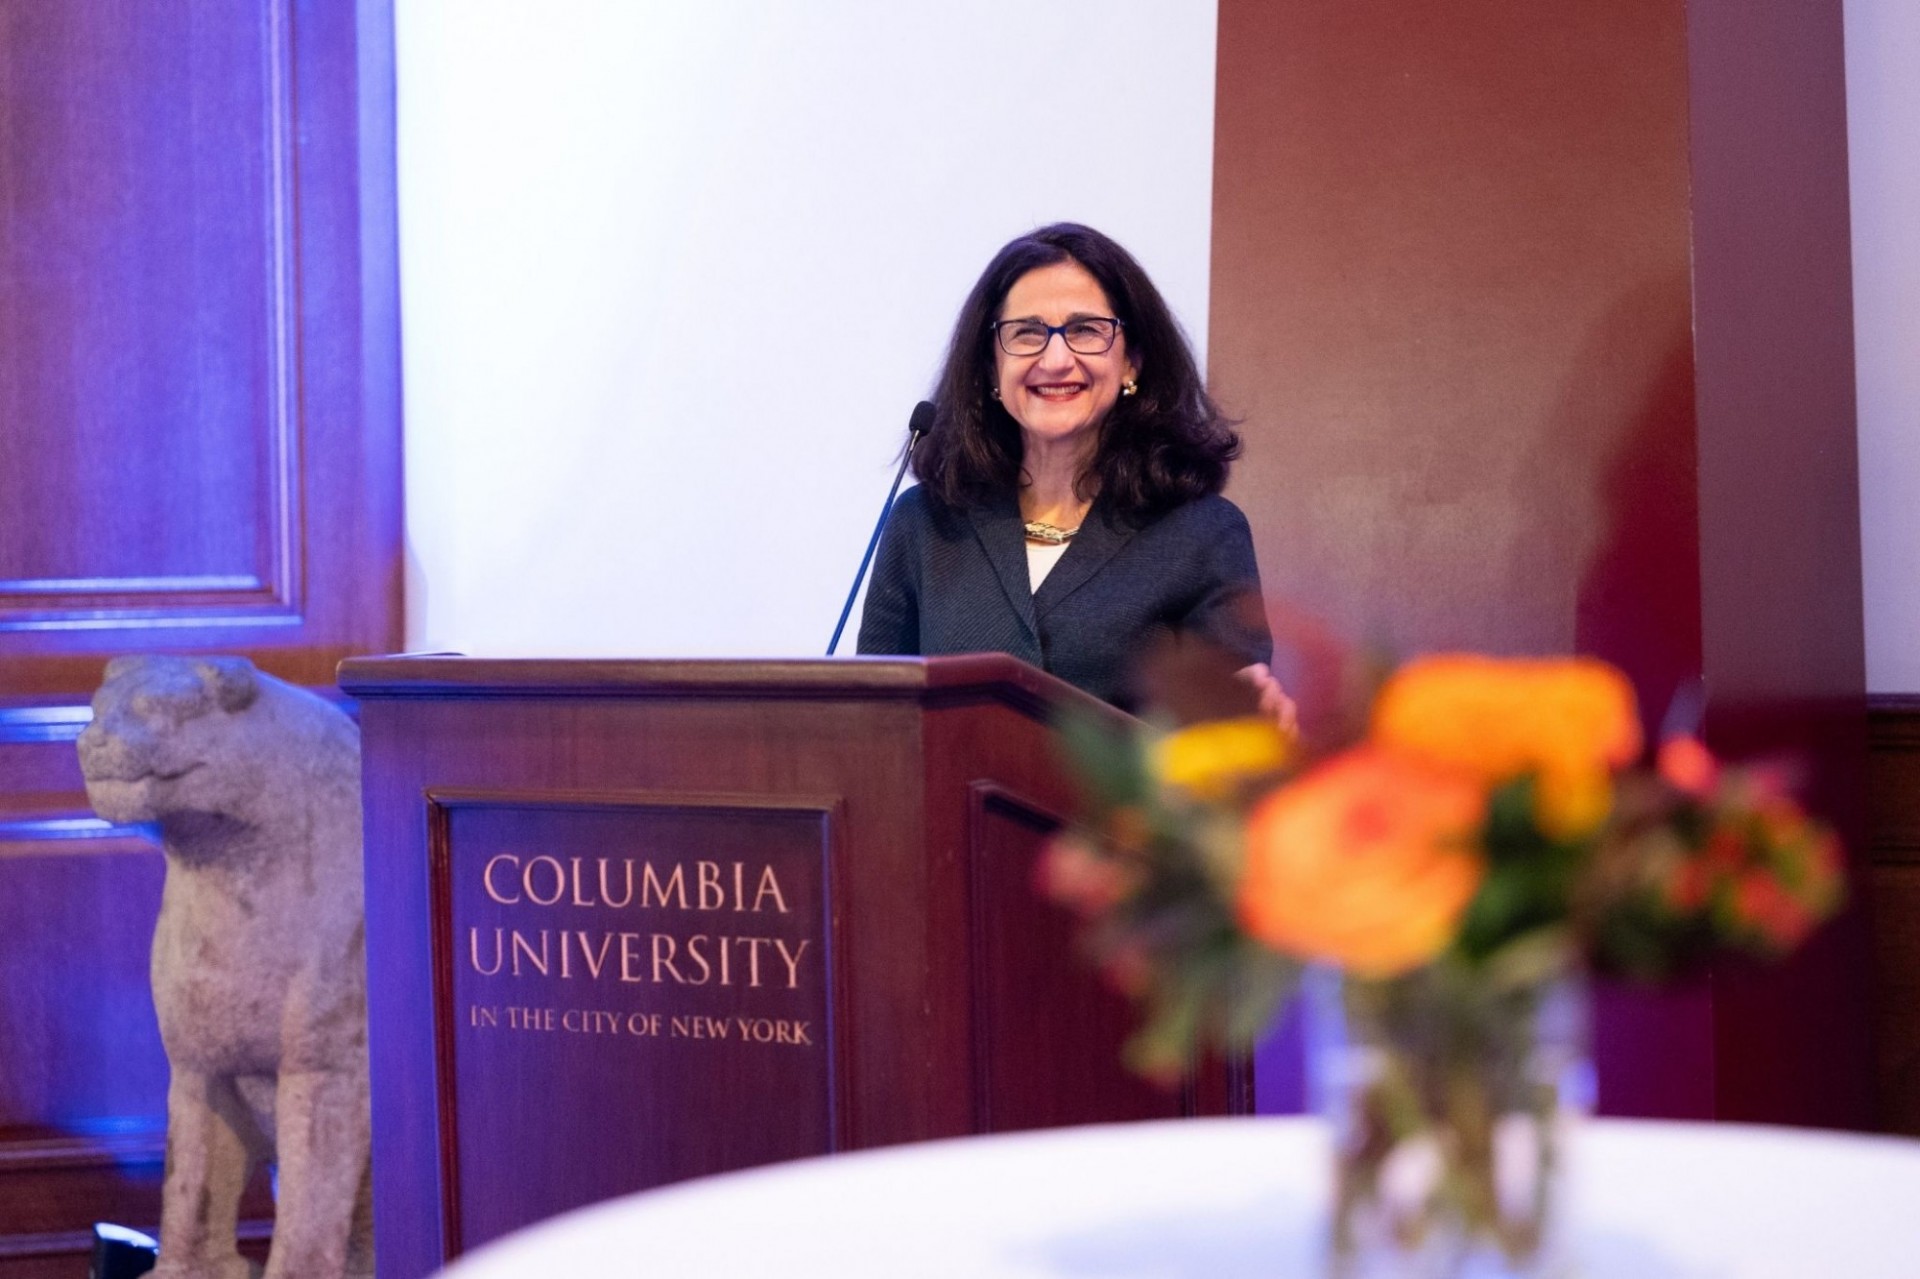 Minouche Shafik, Columbia's president, stands at a podium, smiling, at an evening reception at Columbia University